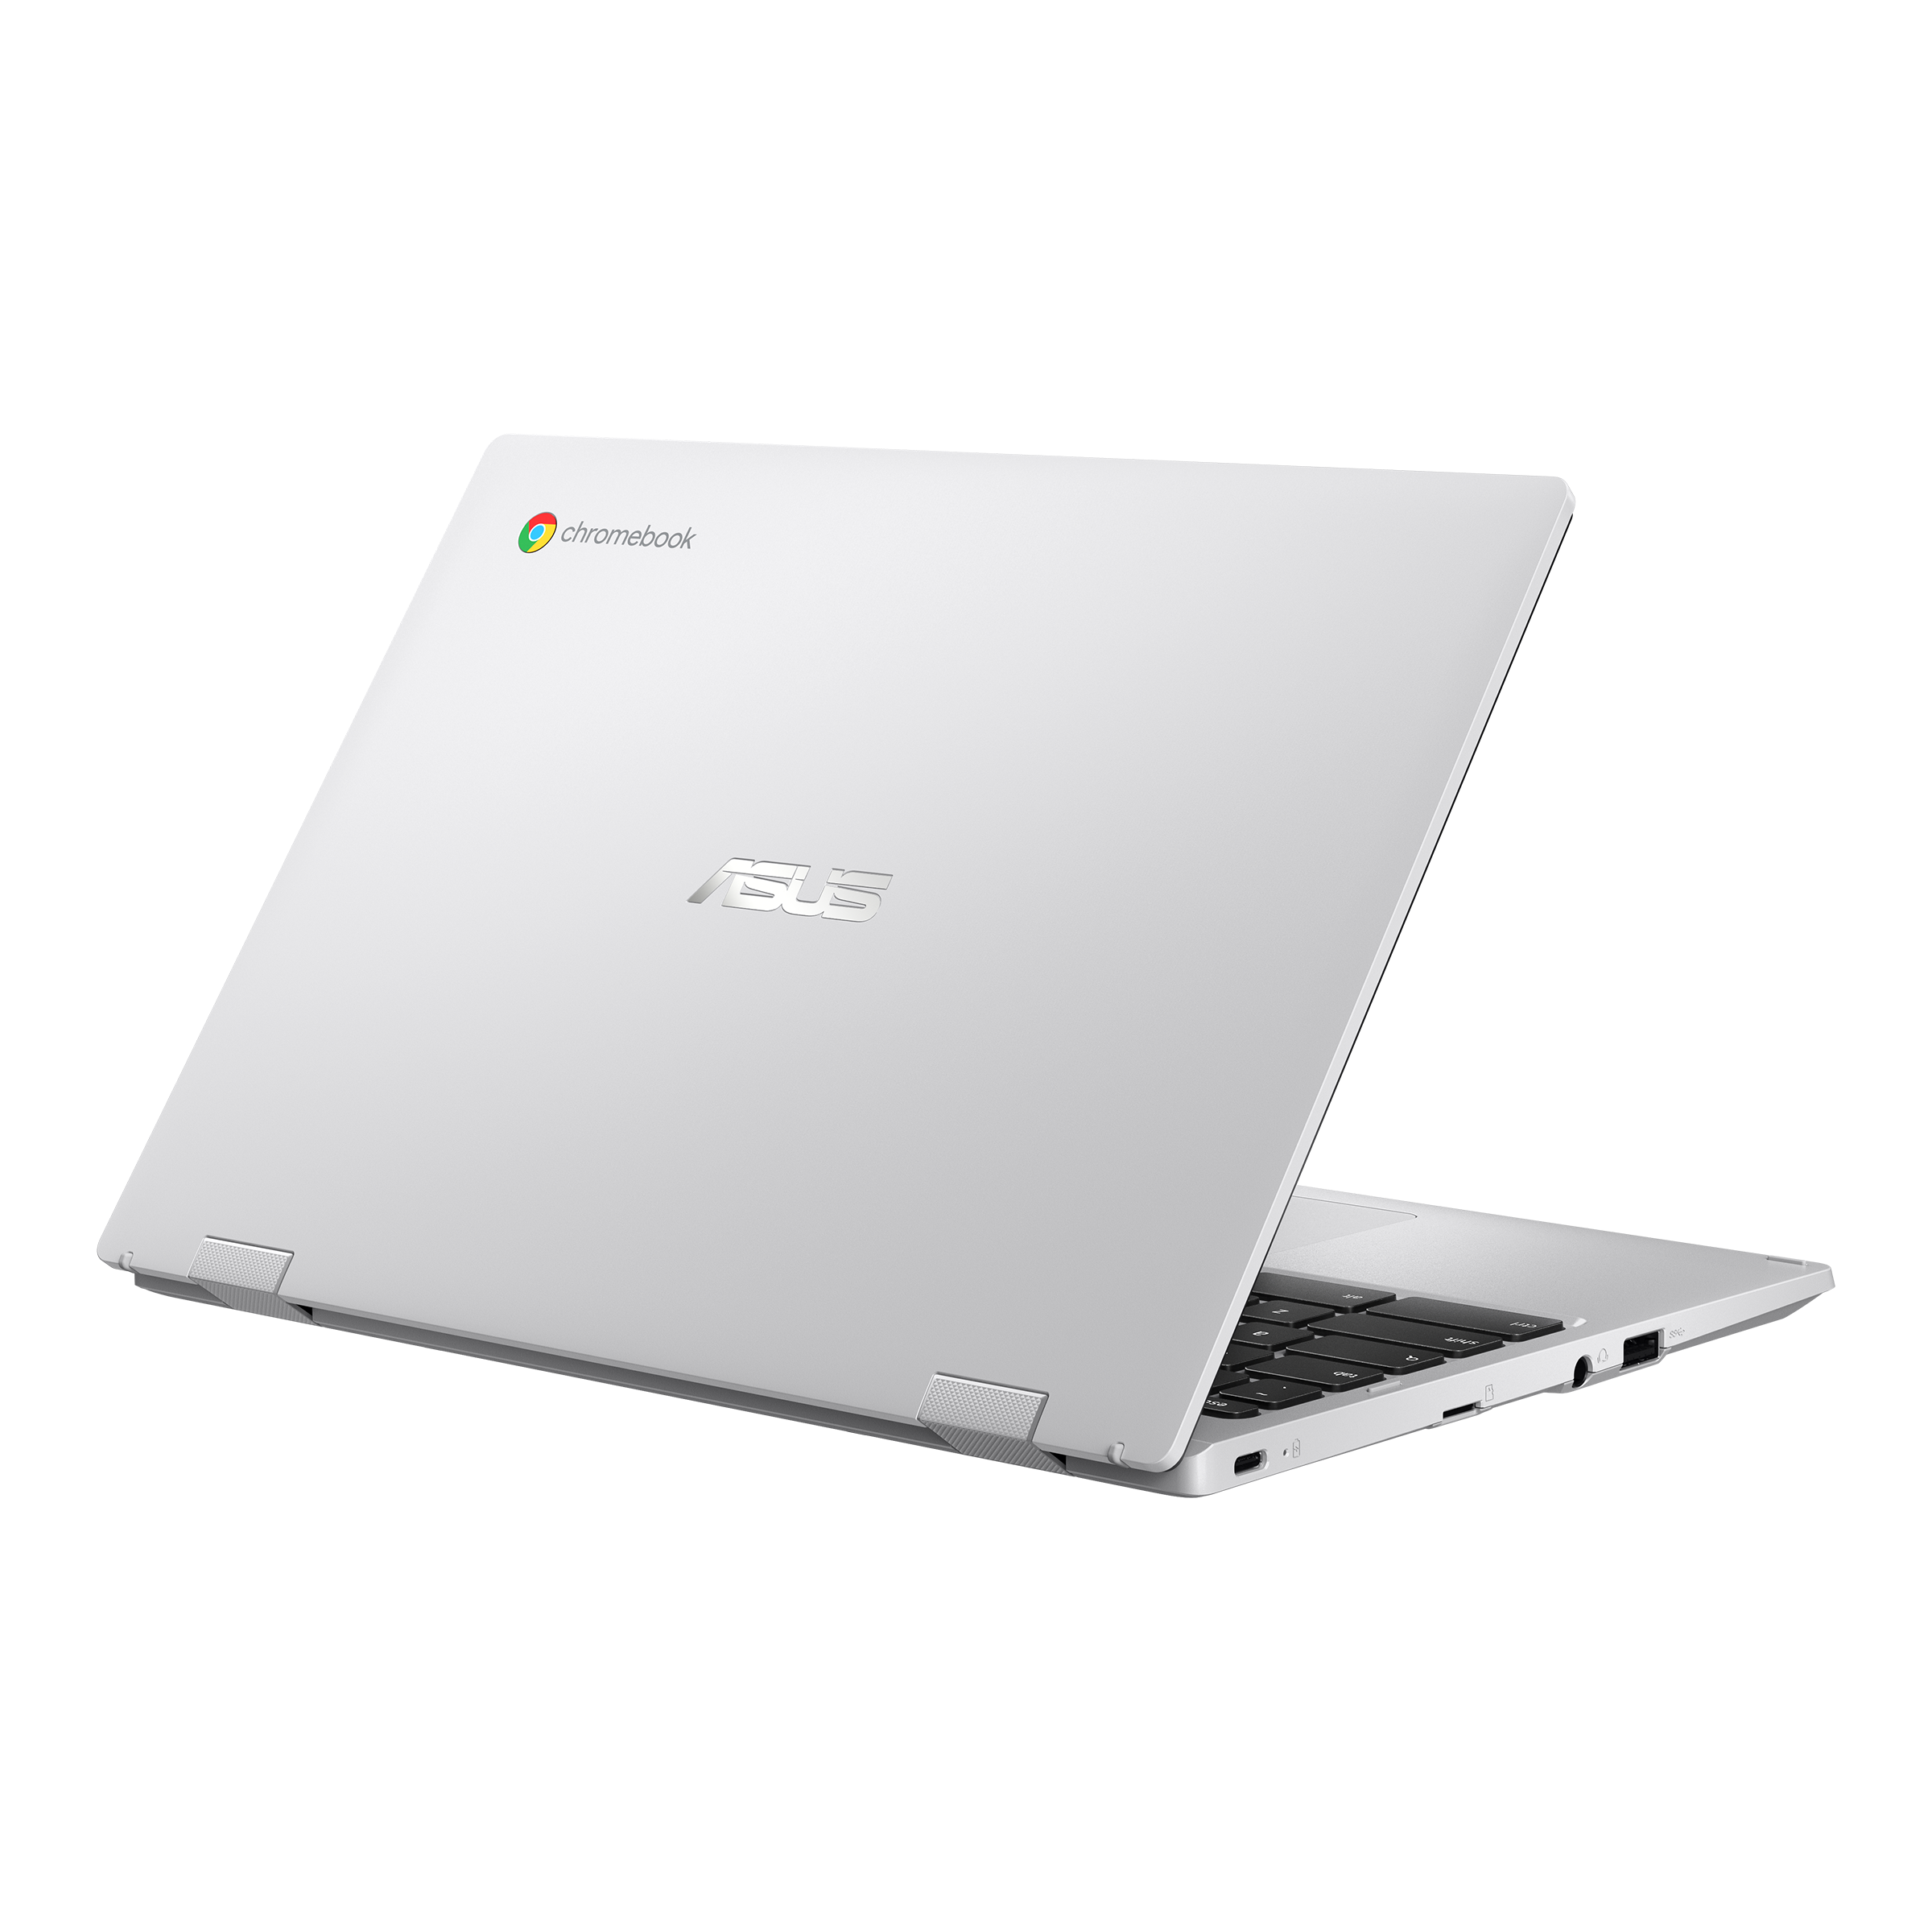 PC/タブレット ノートPC ASUS Chromebook CX1 (CX1102)｜Laptops For Home｜ASUS Global